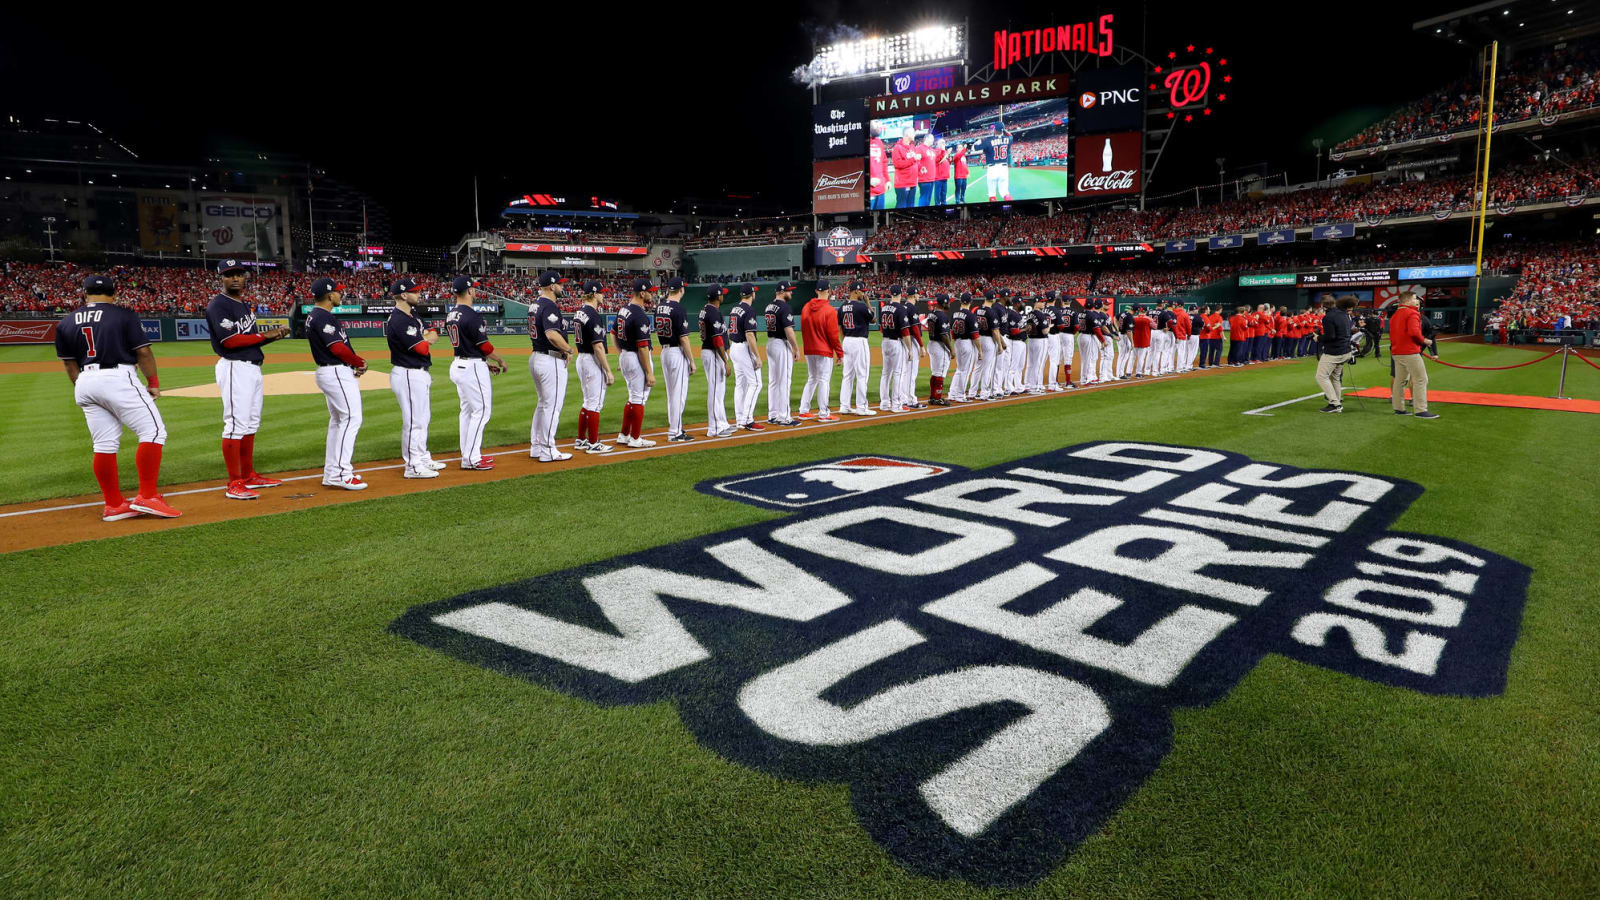 MLB's playoff proposal is a mess. Here are fixes for the sport's real problems.